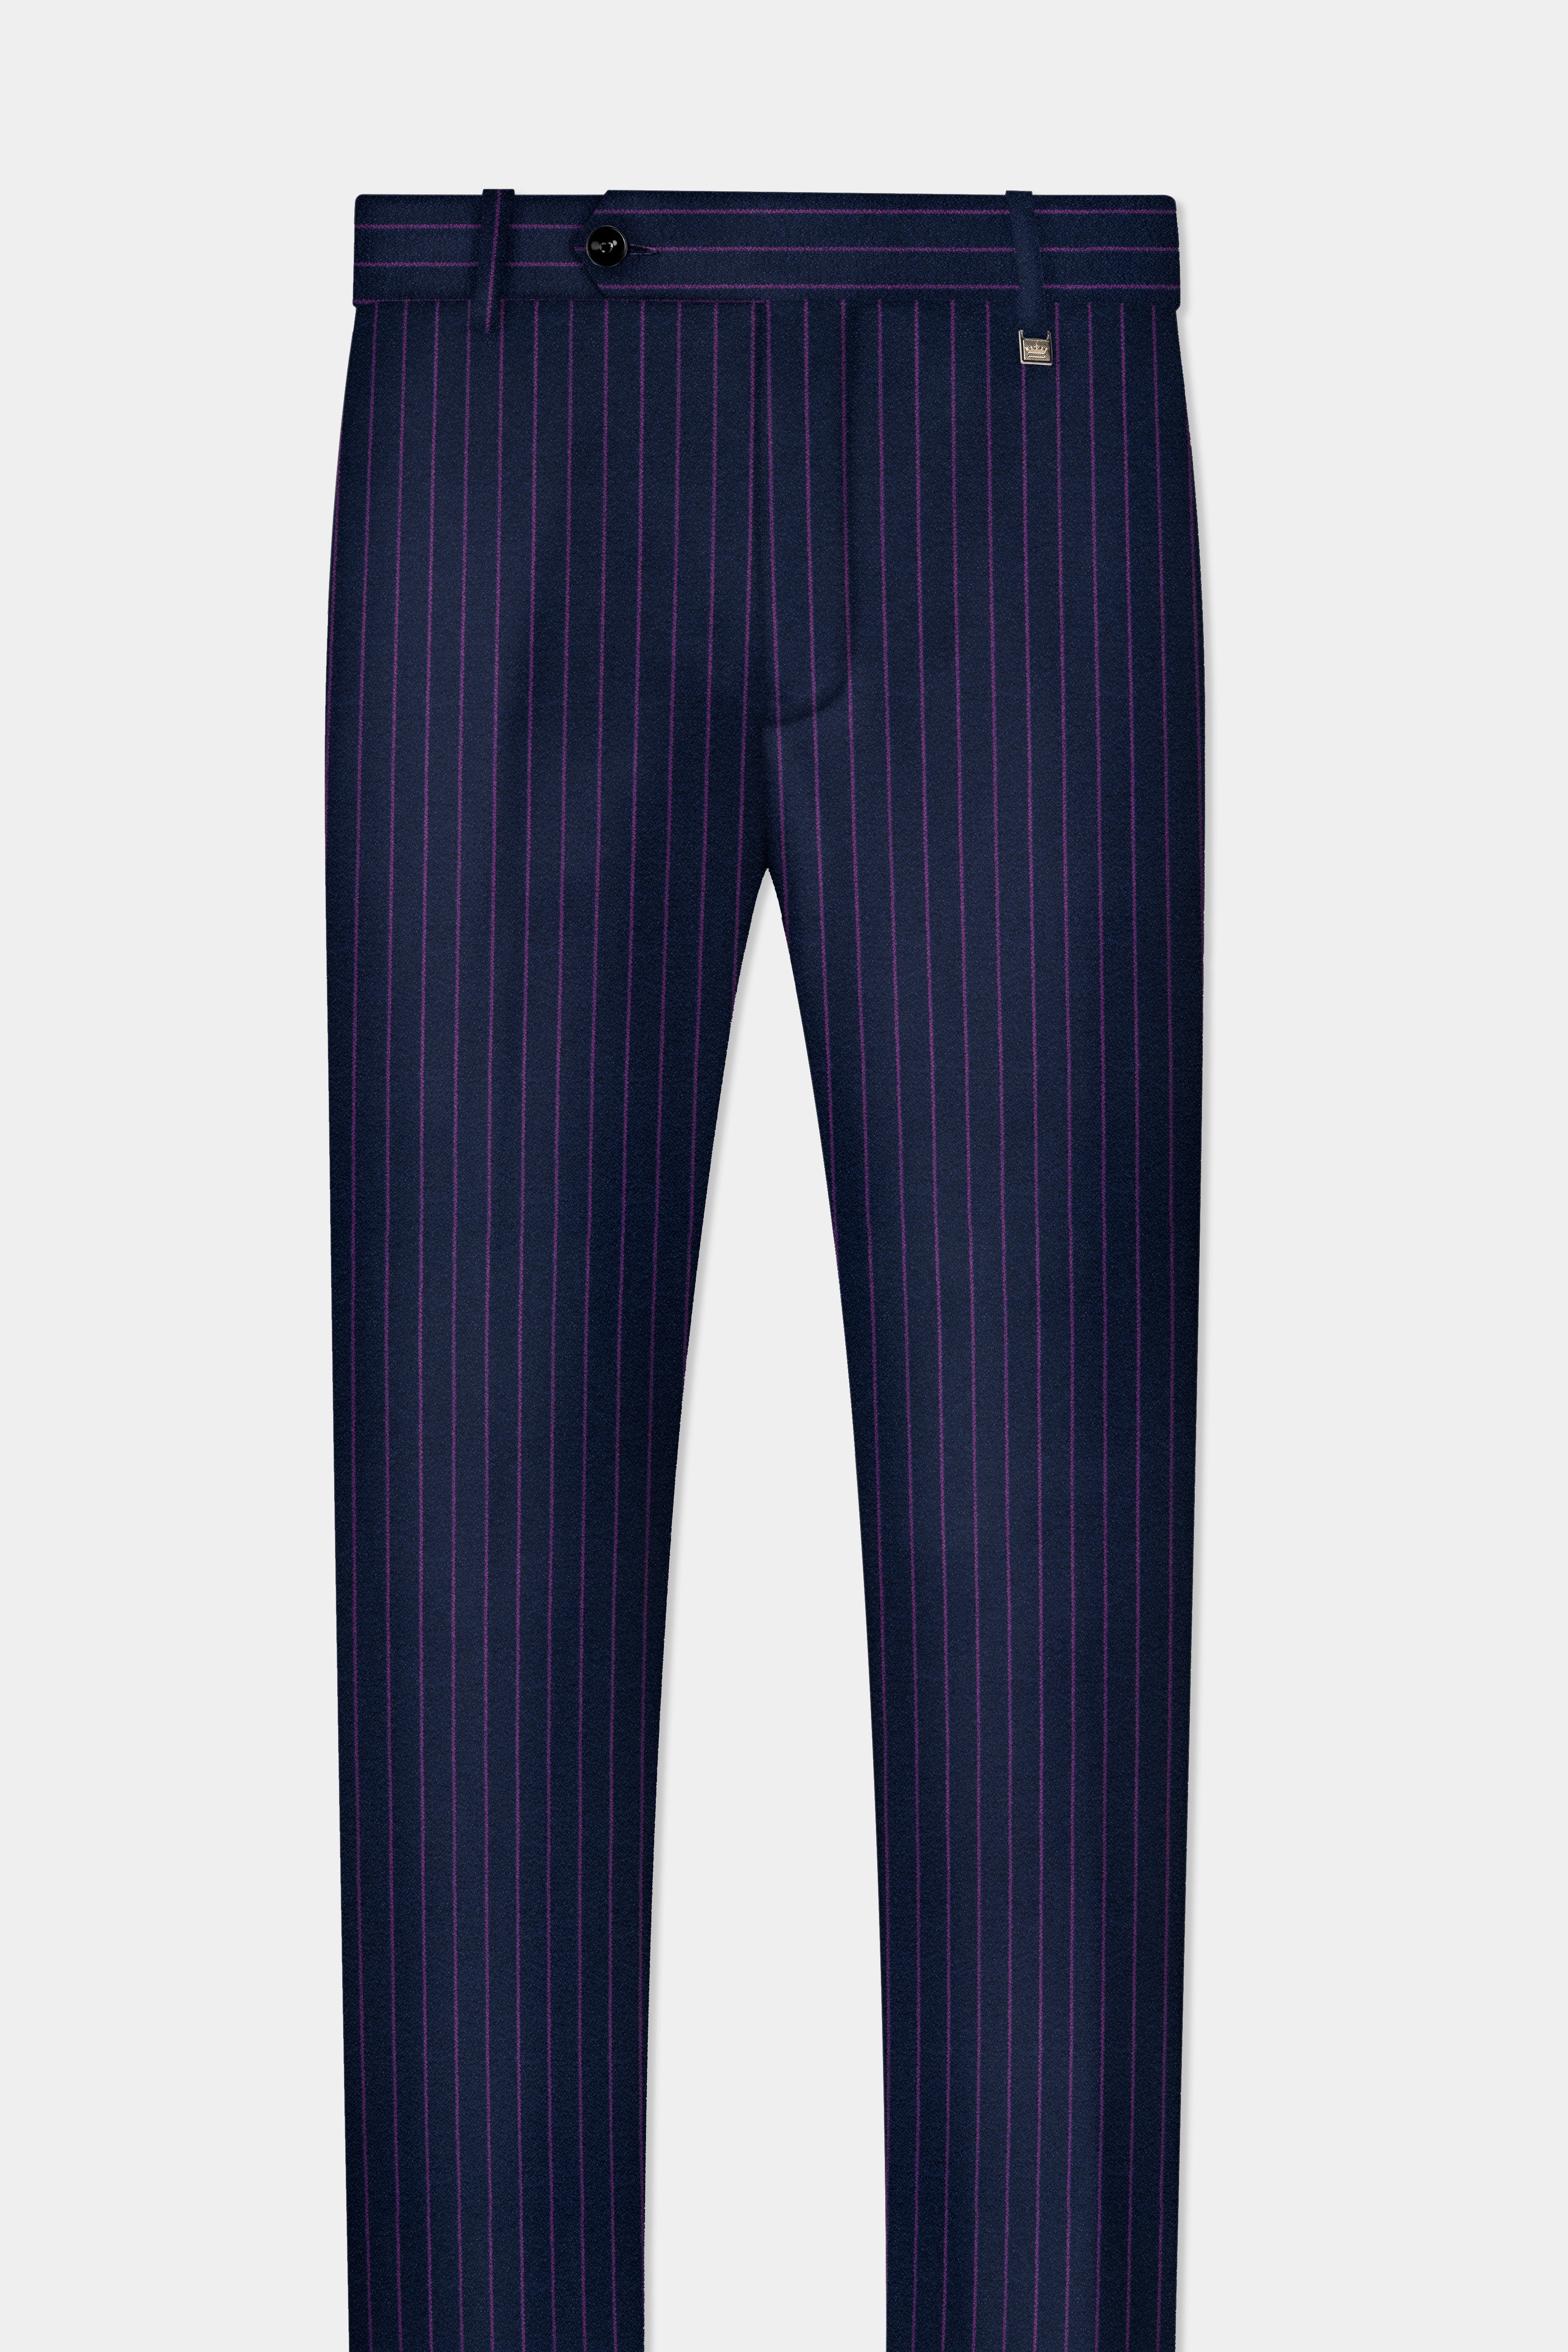 Steel Gray with Grape Purple Striped Wool Blend Pant